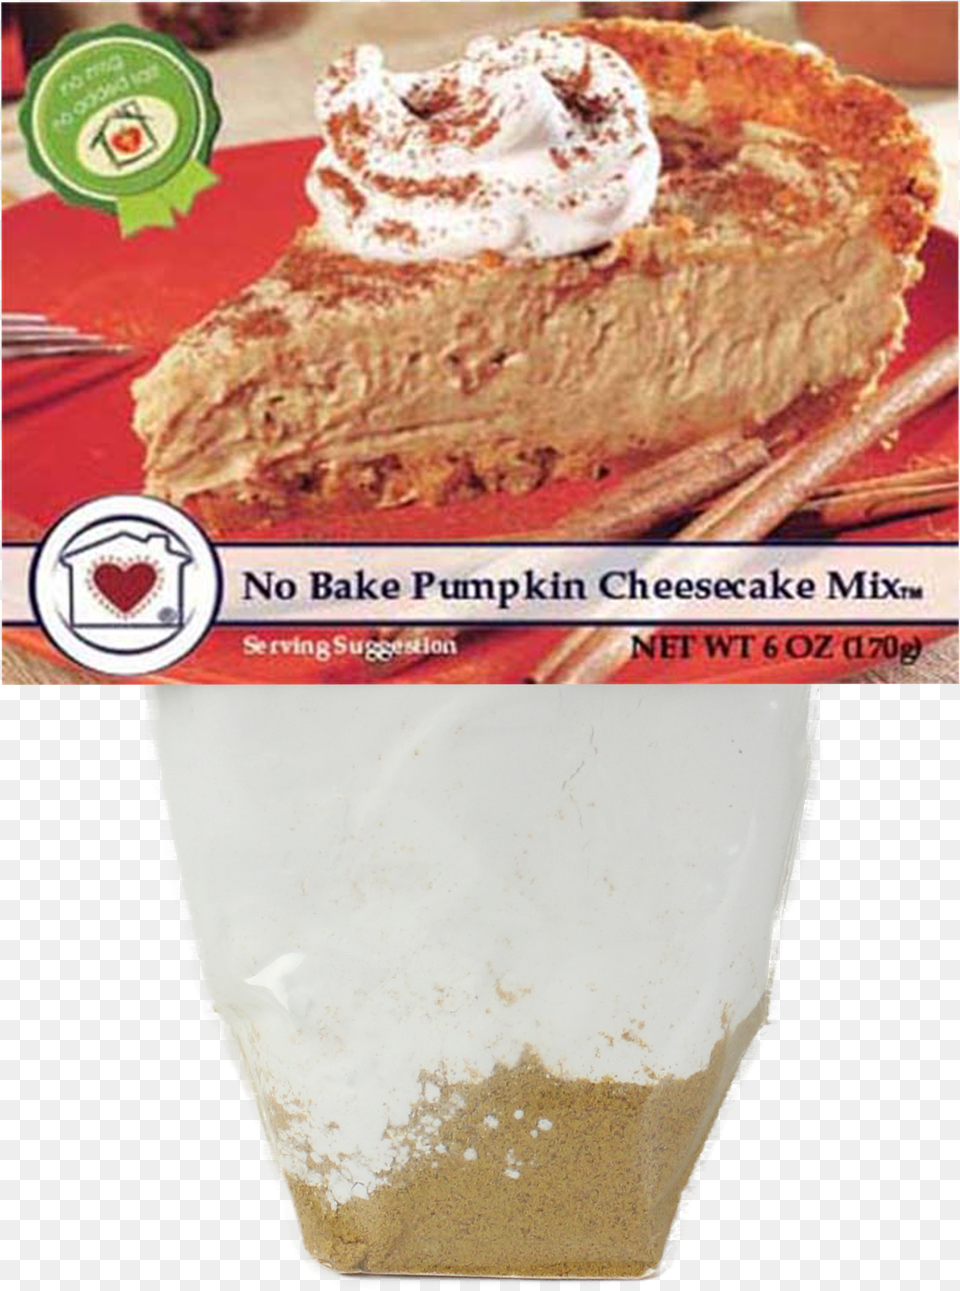 No Bake Pumpkin Cheesecake Mix Country Home Creations Spinach And Artichoke Dip Mix, Cream, Dessert, Food, Ice Cream Free Transparent Png